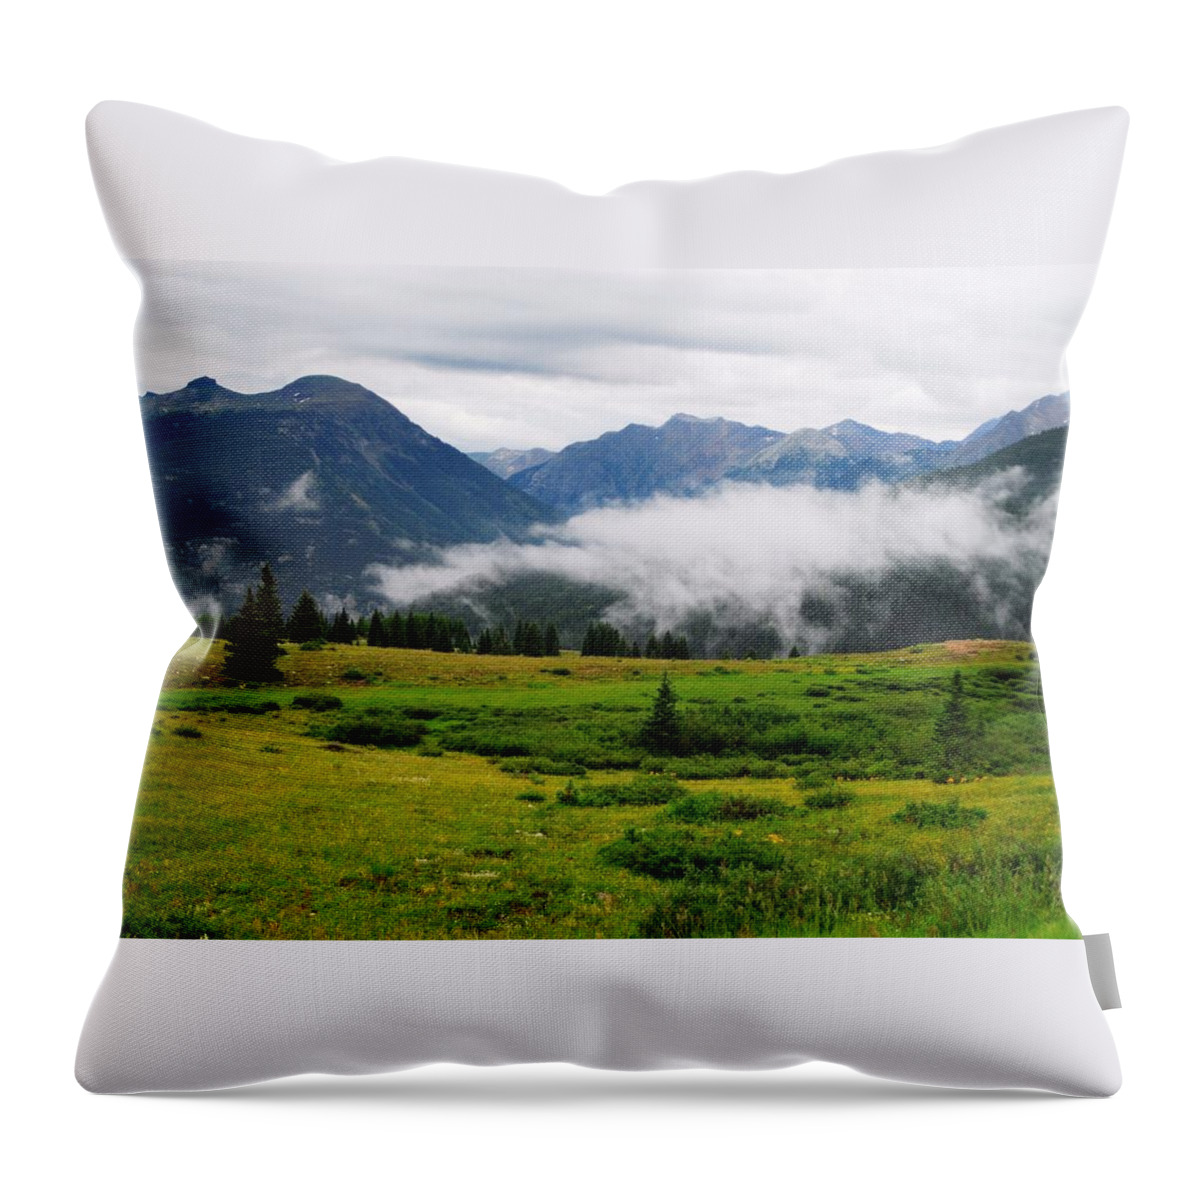 Mountains Throw Pillow featuring the photograph Above The Clouds by Brad Hodges